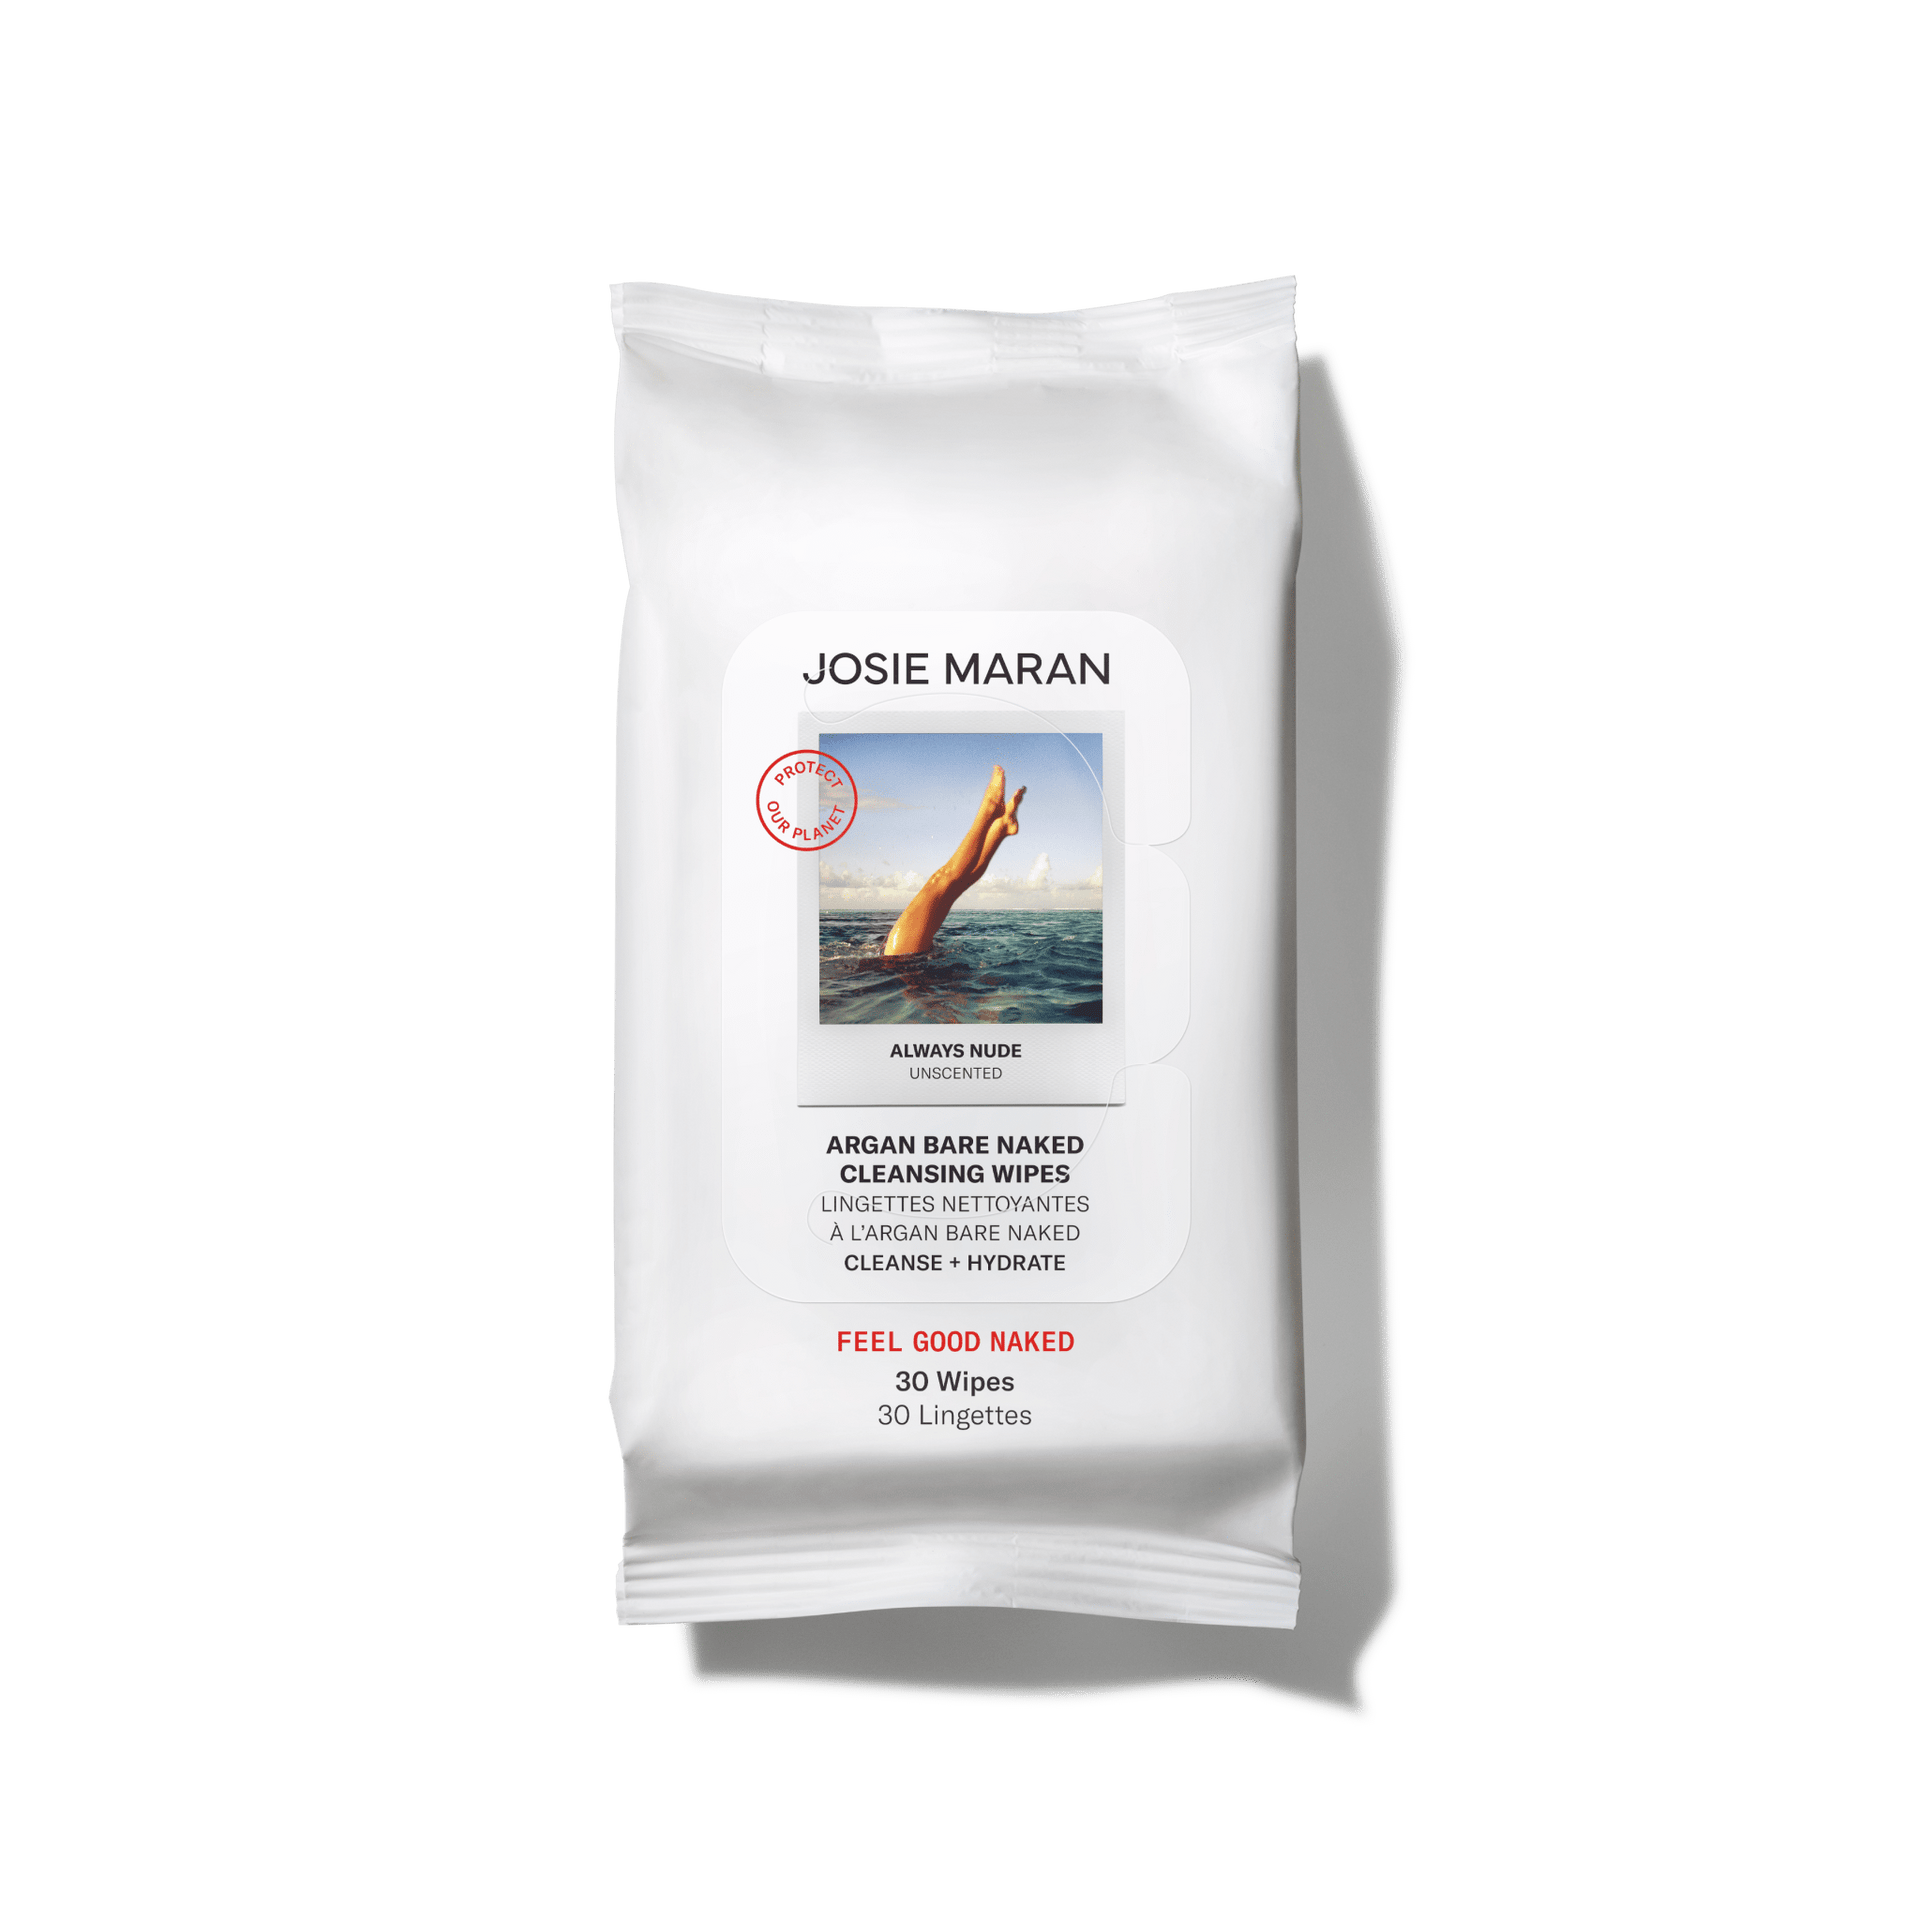 Argan Bare Naked Cleansing Wipes